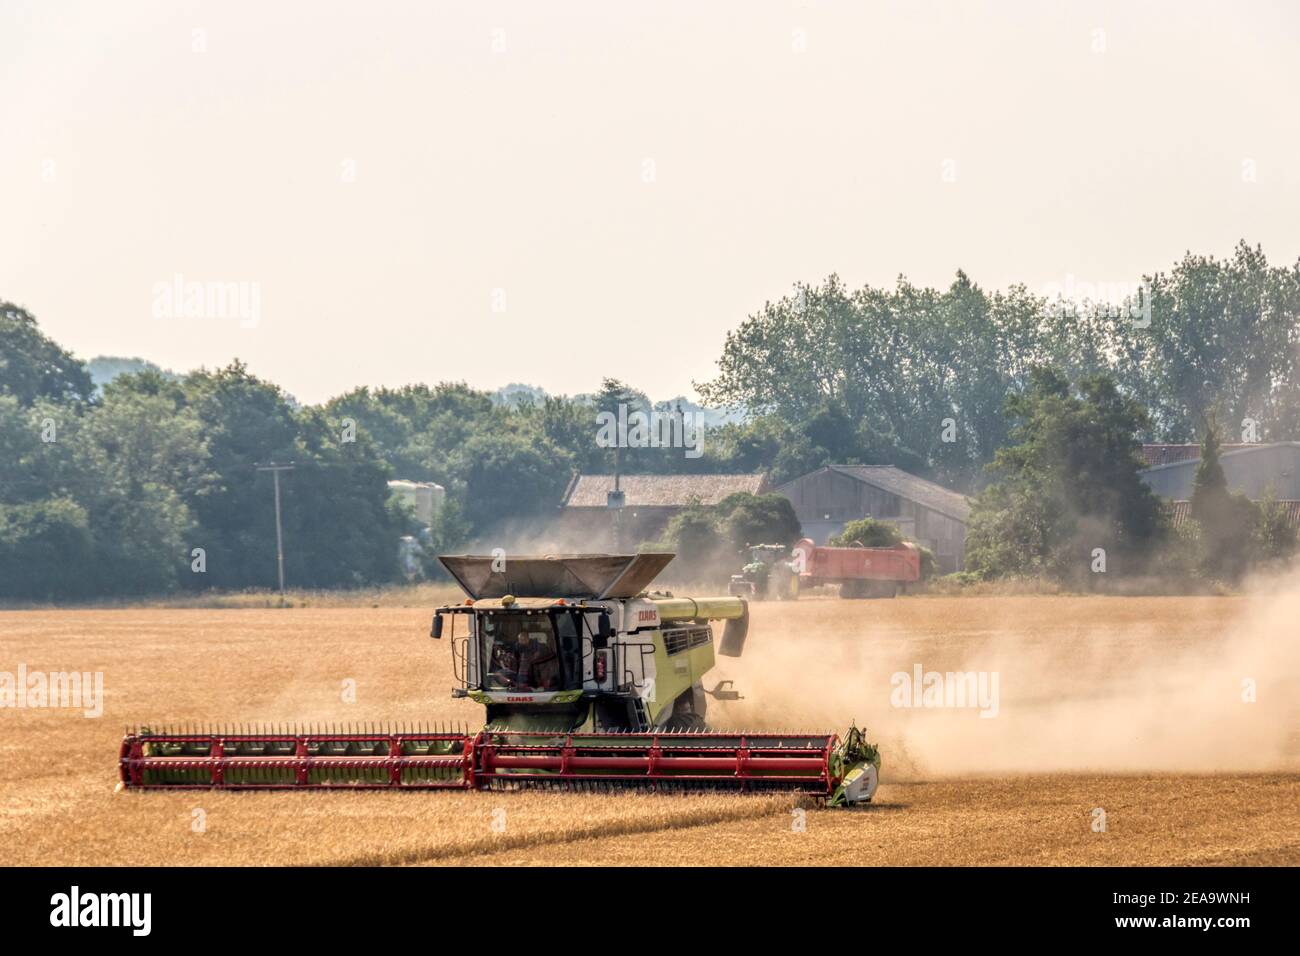 A combine harvester enveloped in a cloud of dust while harvesting a field in Norfolk, UK. Stock Photo